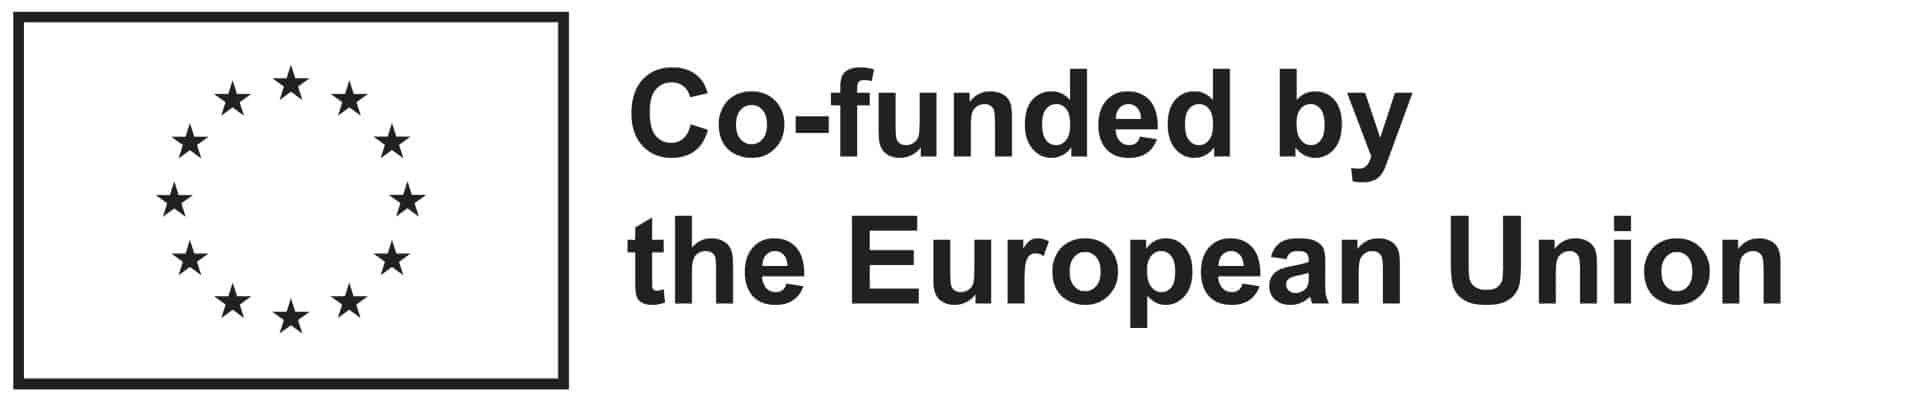 co-funded by EU